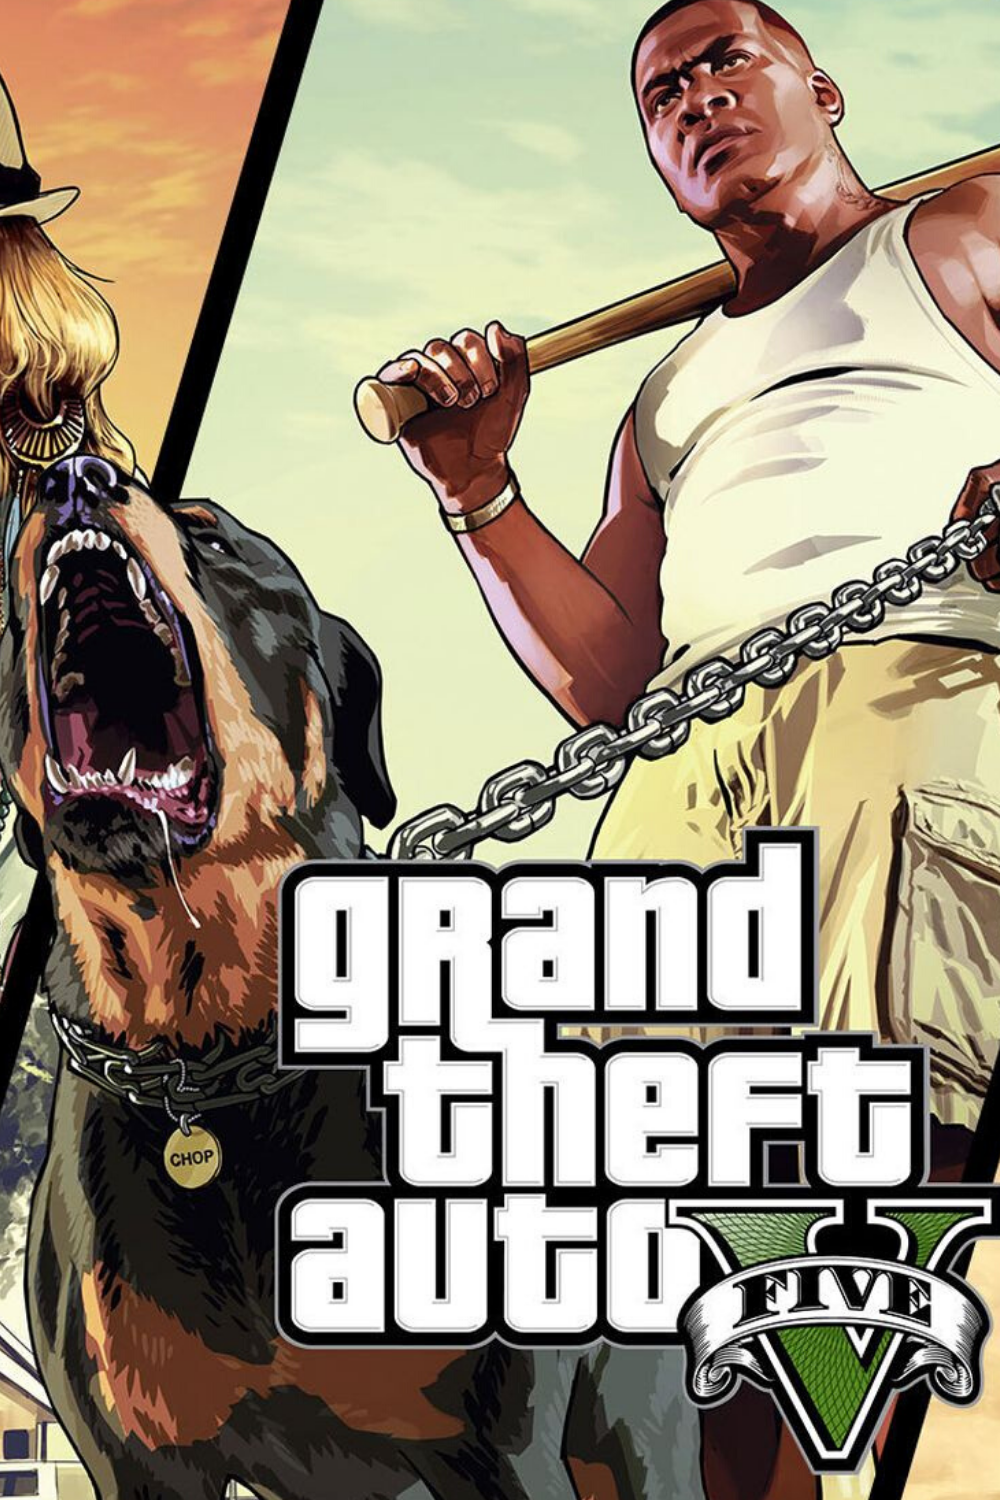 GTA 5 Free Download Full PC Version From Epic Games Store Tech Gadgets. Gta 5 games, Grand theft auto, Grand theft auto series